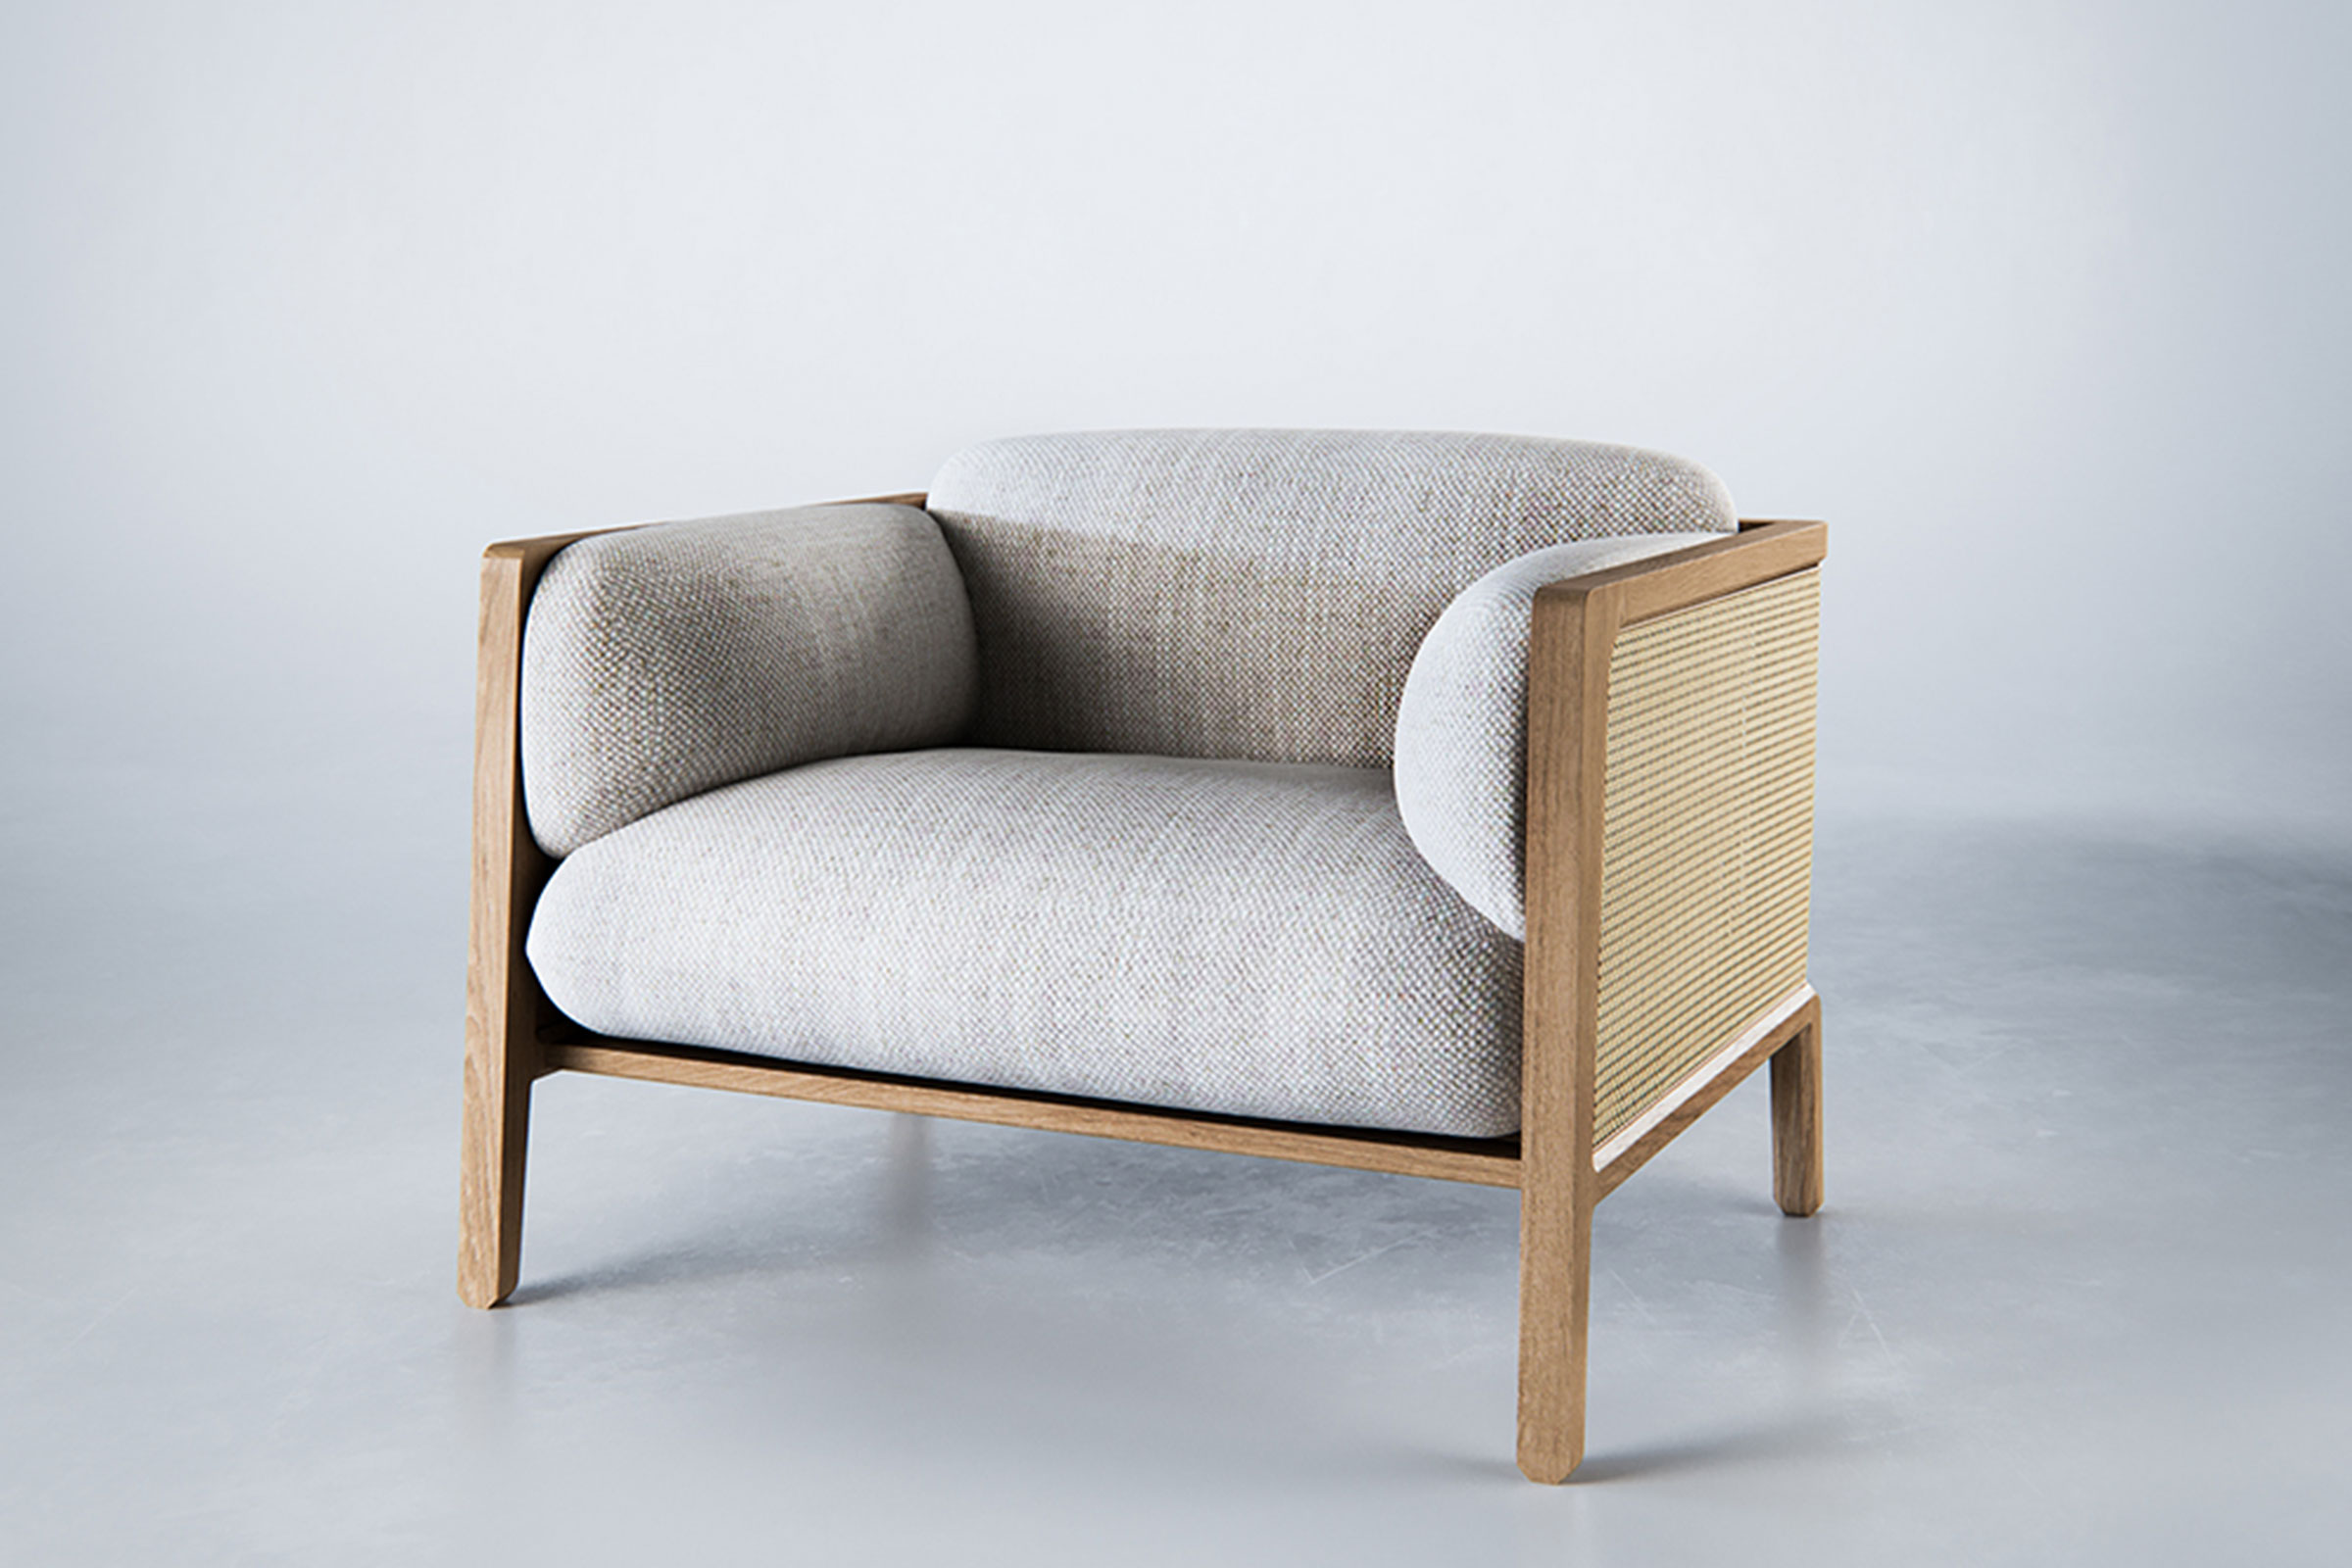   The Wood Room  also placed as a runner-up, and the moody space they created to showcase their product is certainly worth a mention. The combination of rattan and upholstery in the new Trim collection is a winner, too 